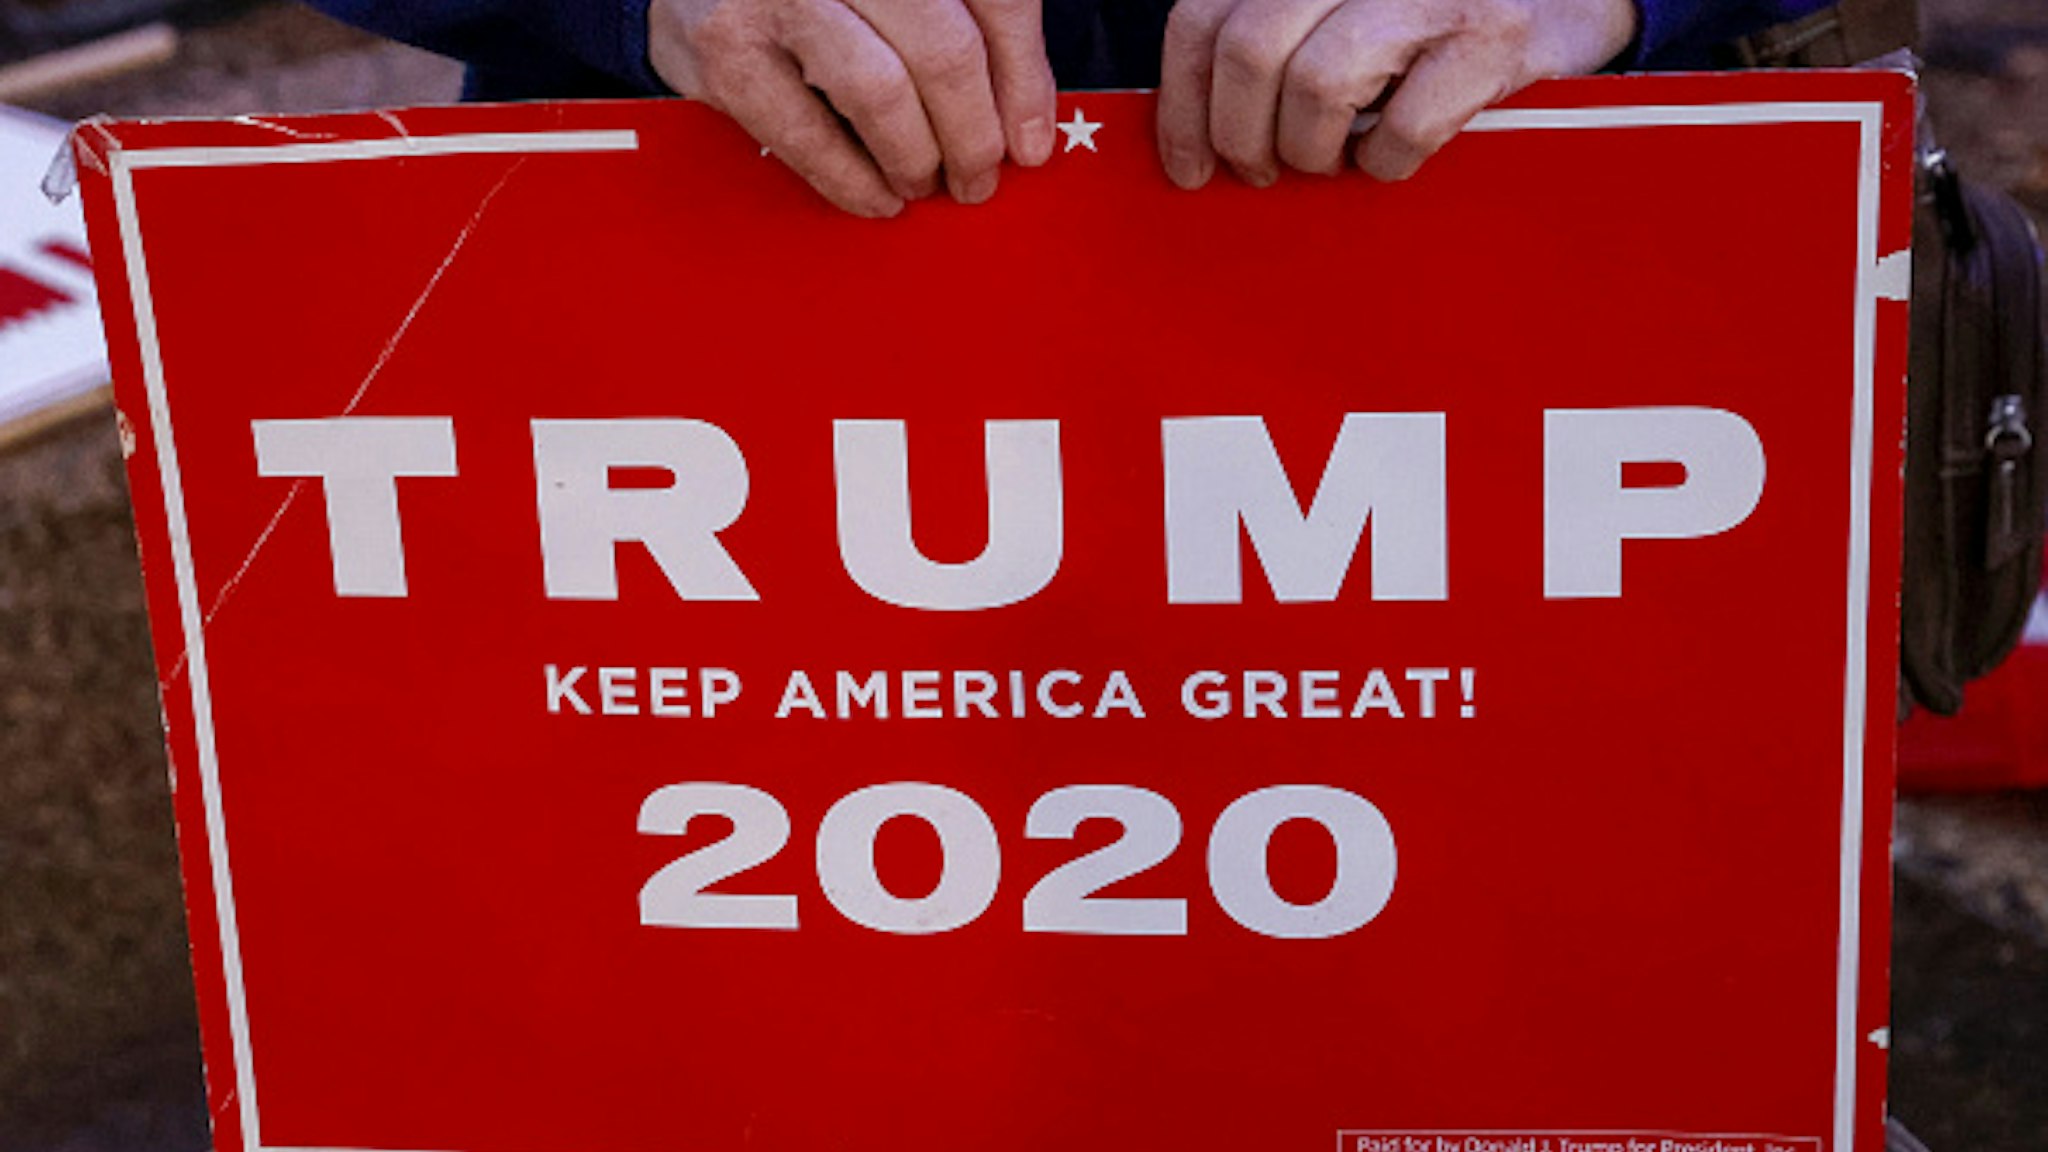 An Israeli supporter of US President Donald Trump carries a sign during a rally in the northern Israeli city of Karmiel near Haifa on November 3, 2020, to express their support for him during the US presidential election.